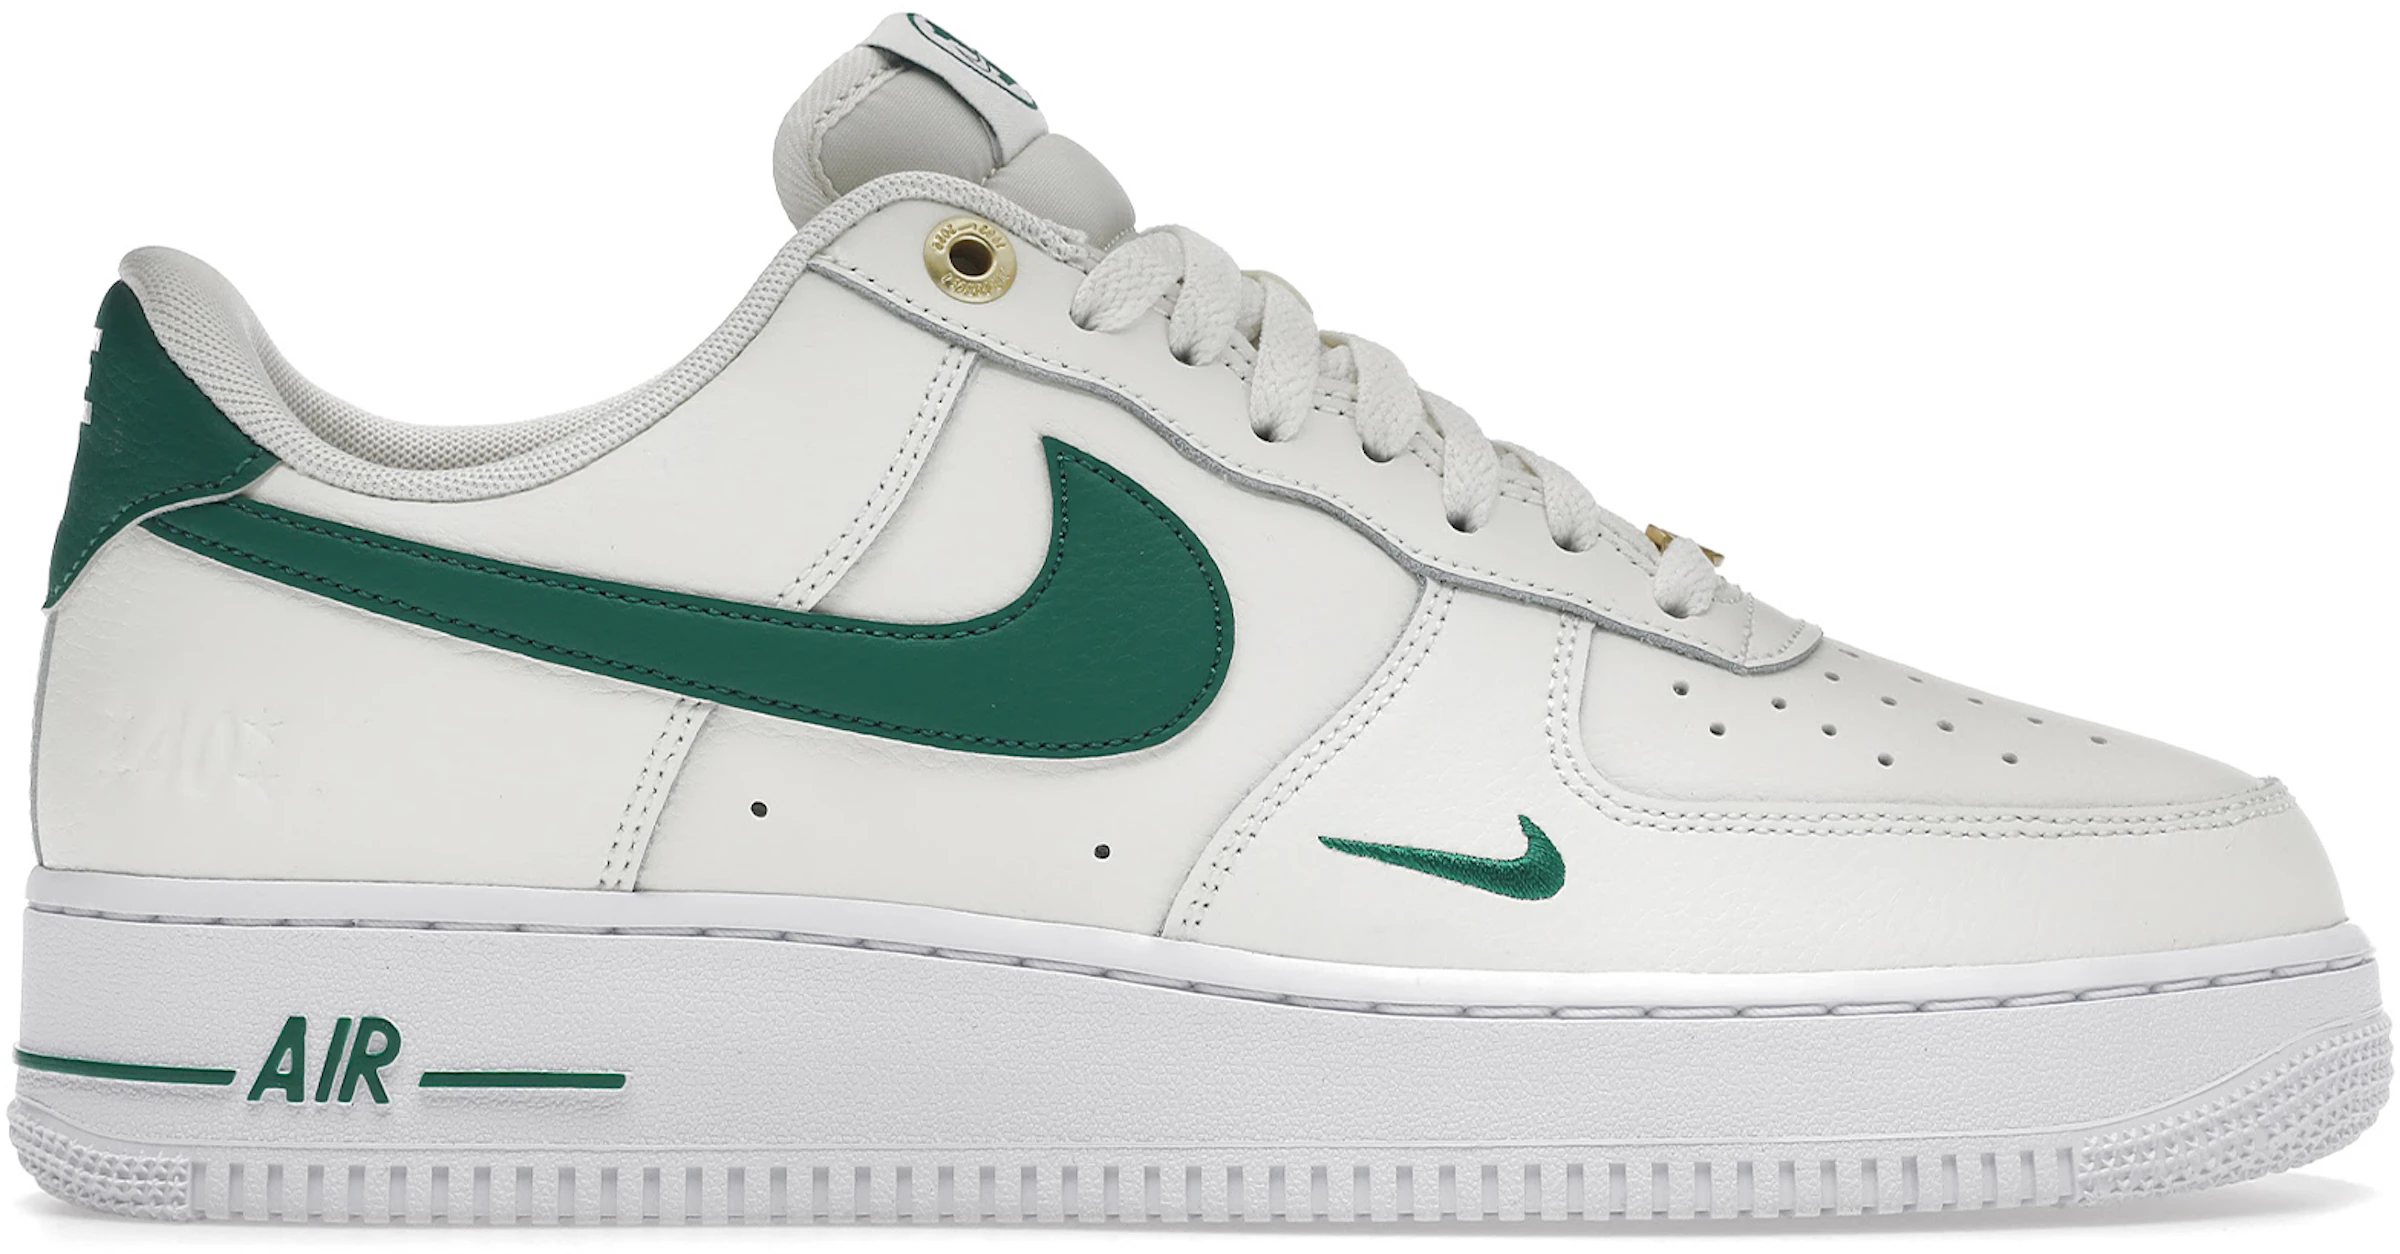 Compra Nike Air Force hombres y mujeres - StockX